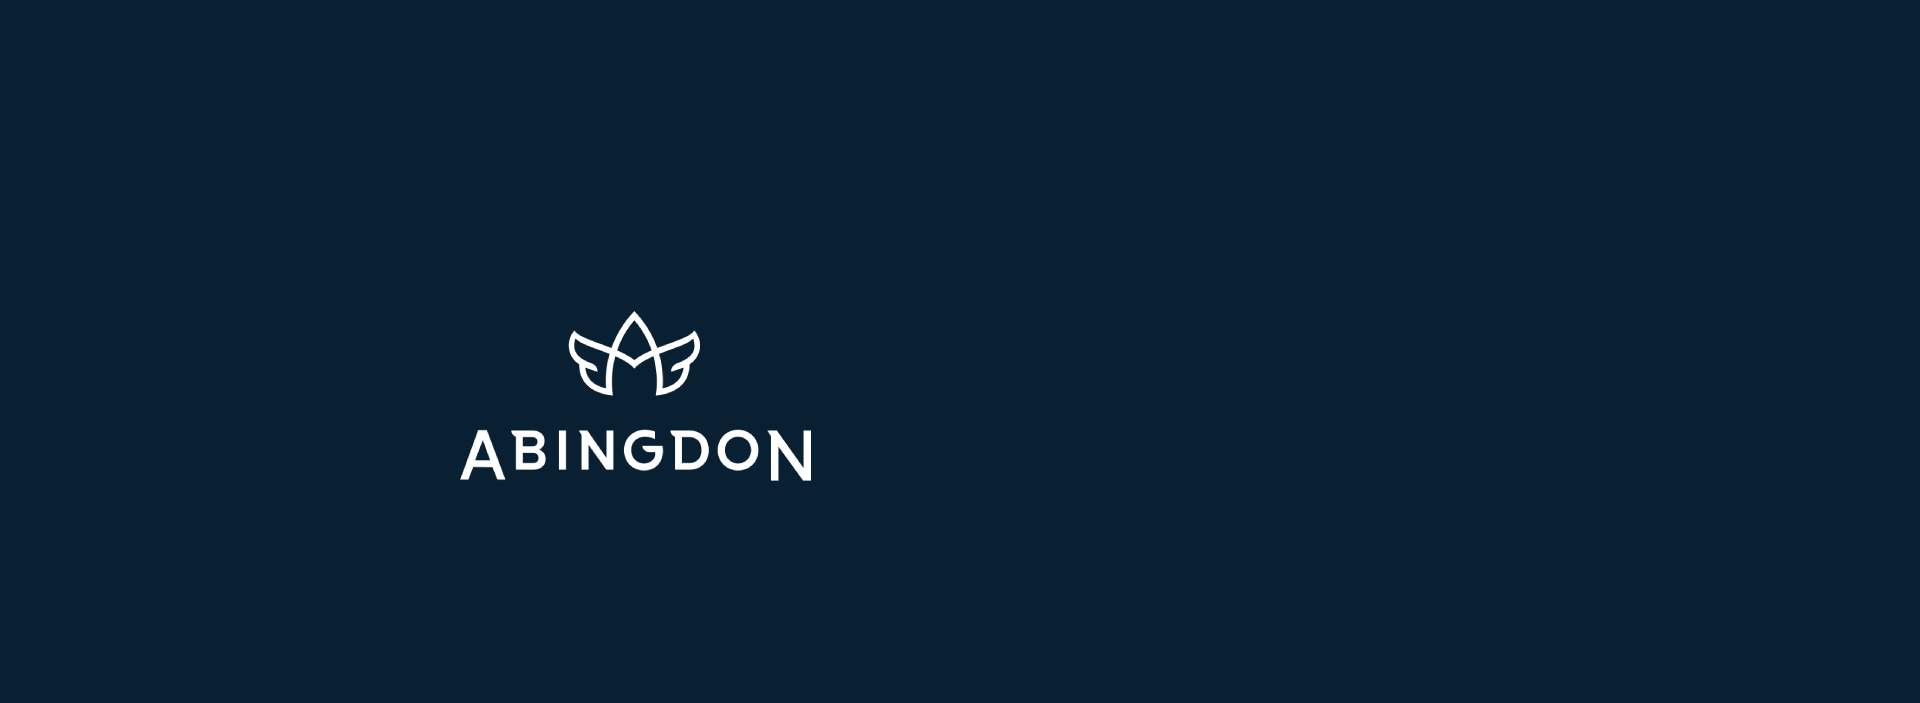 Abingdon, Performance Watch Brand, Evolves with a New Identity